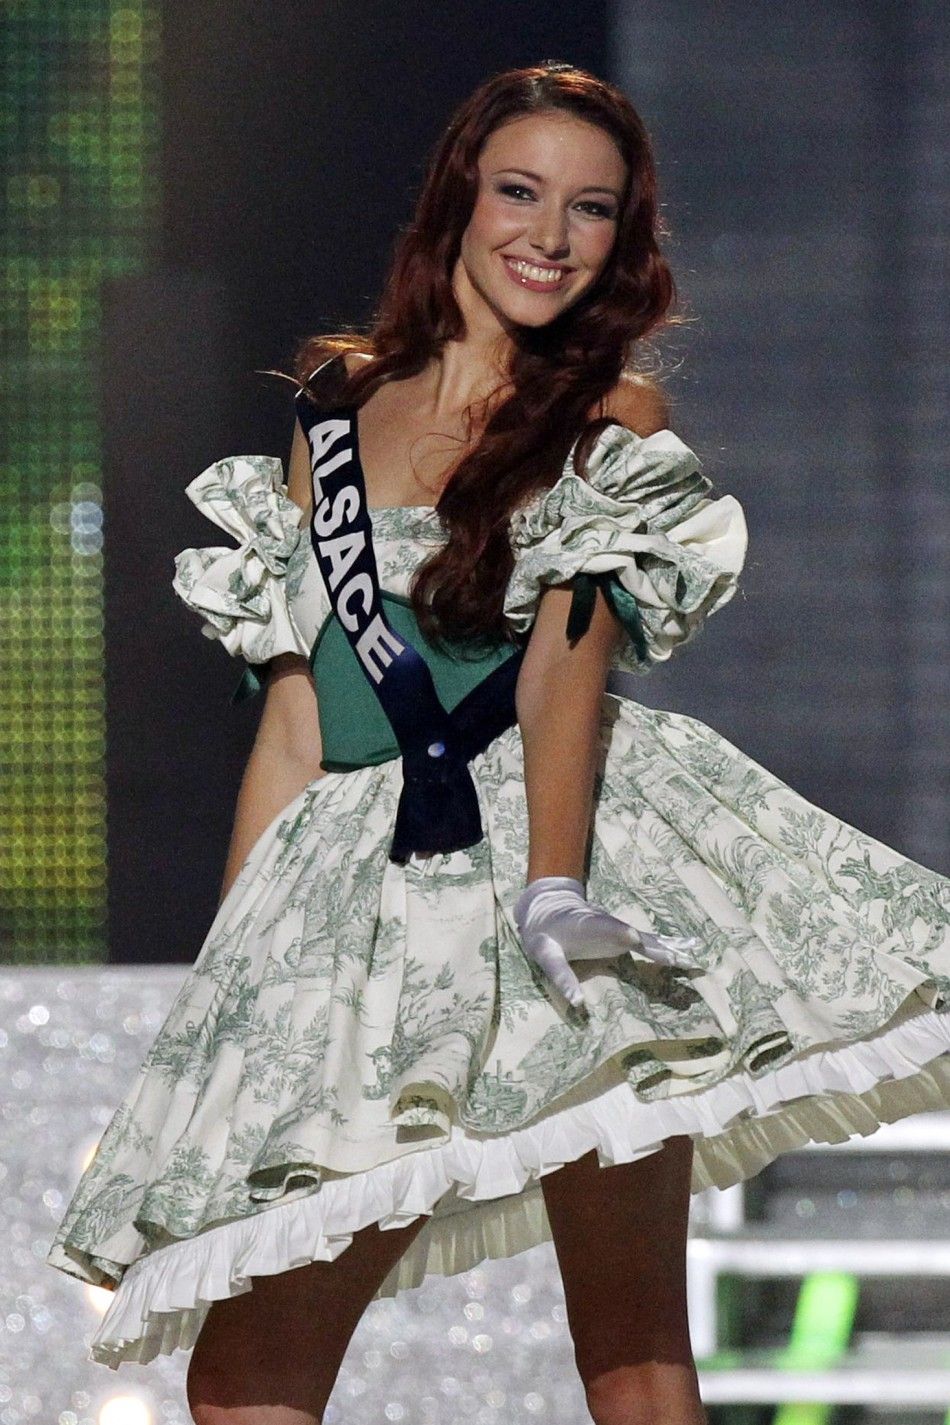 Miss Alsace, Delphine Wespiser Announced Winner of 2012 Miss France Pageant 